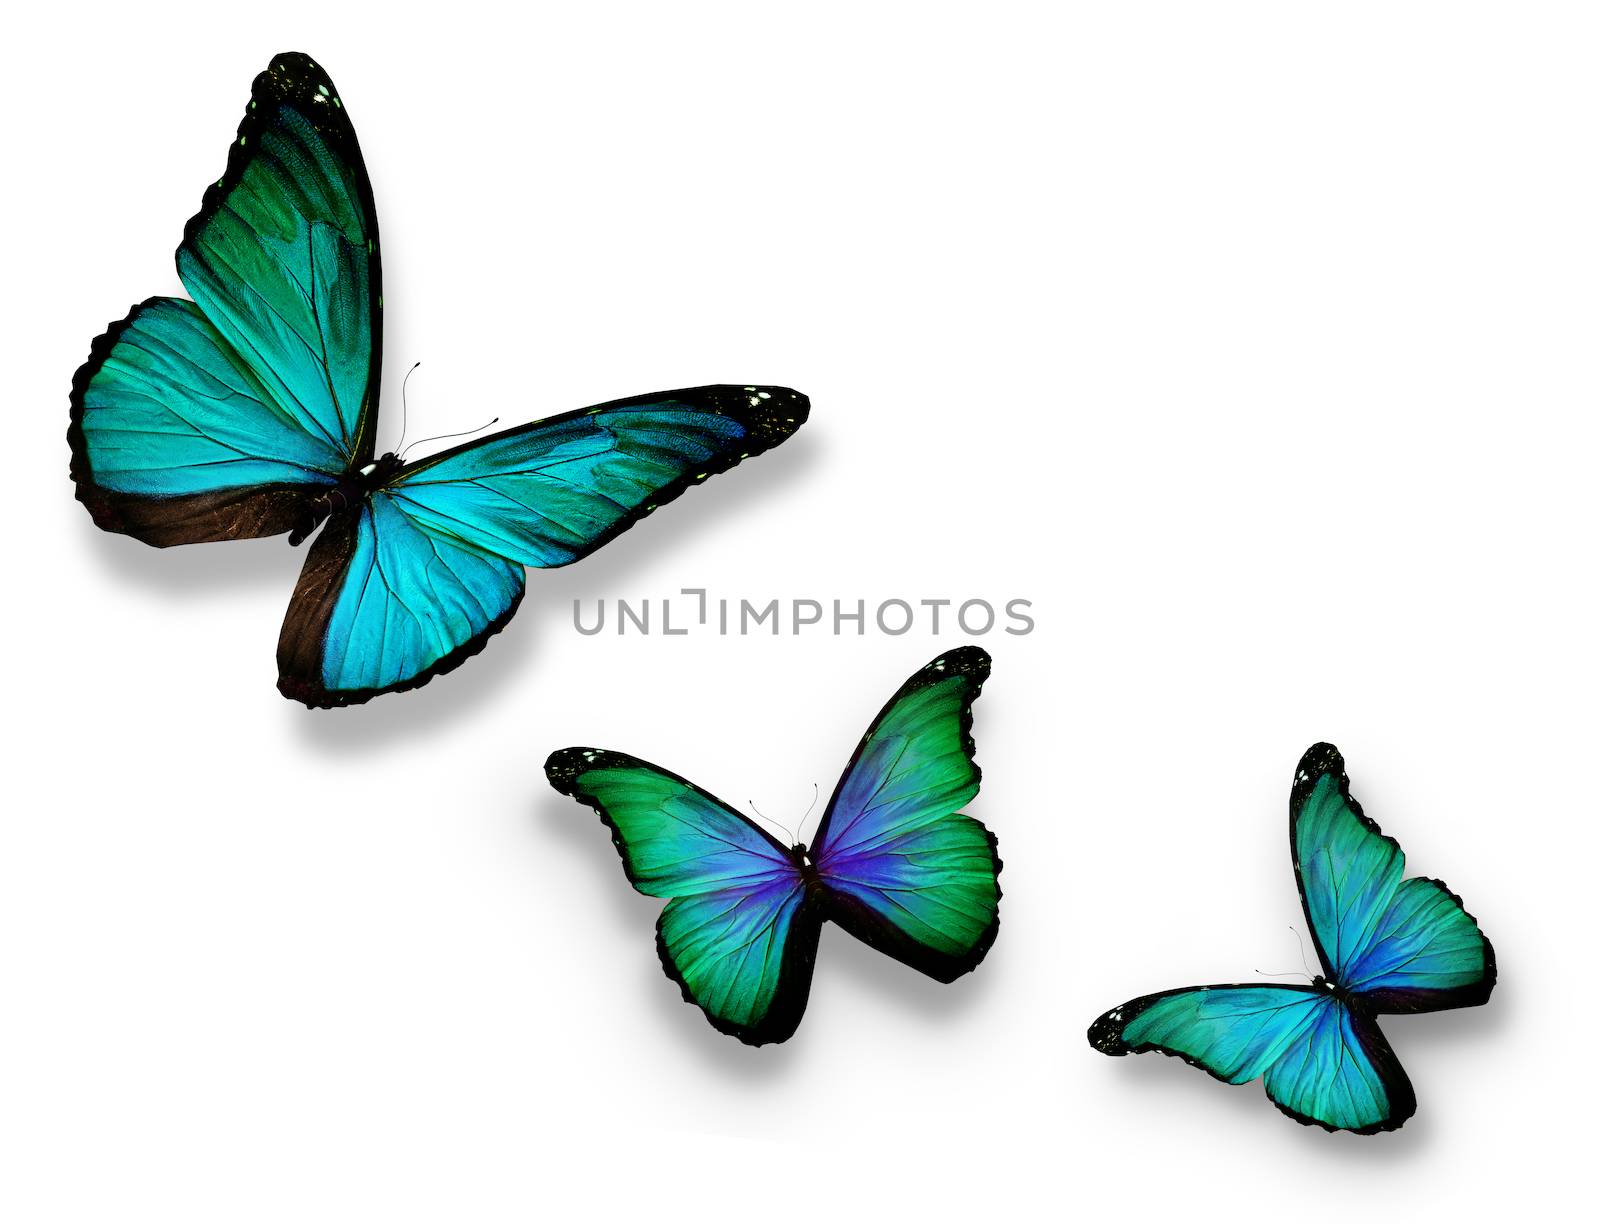 Three turquoise butterflies, isolated on white